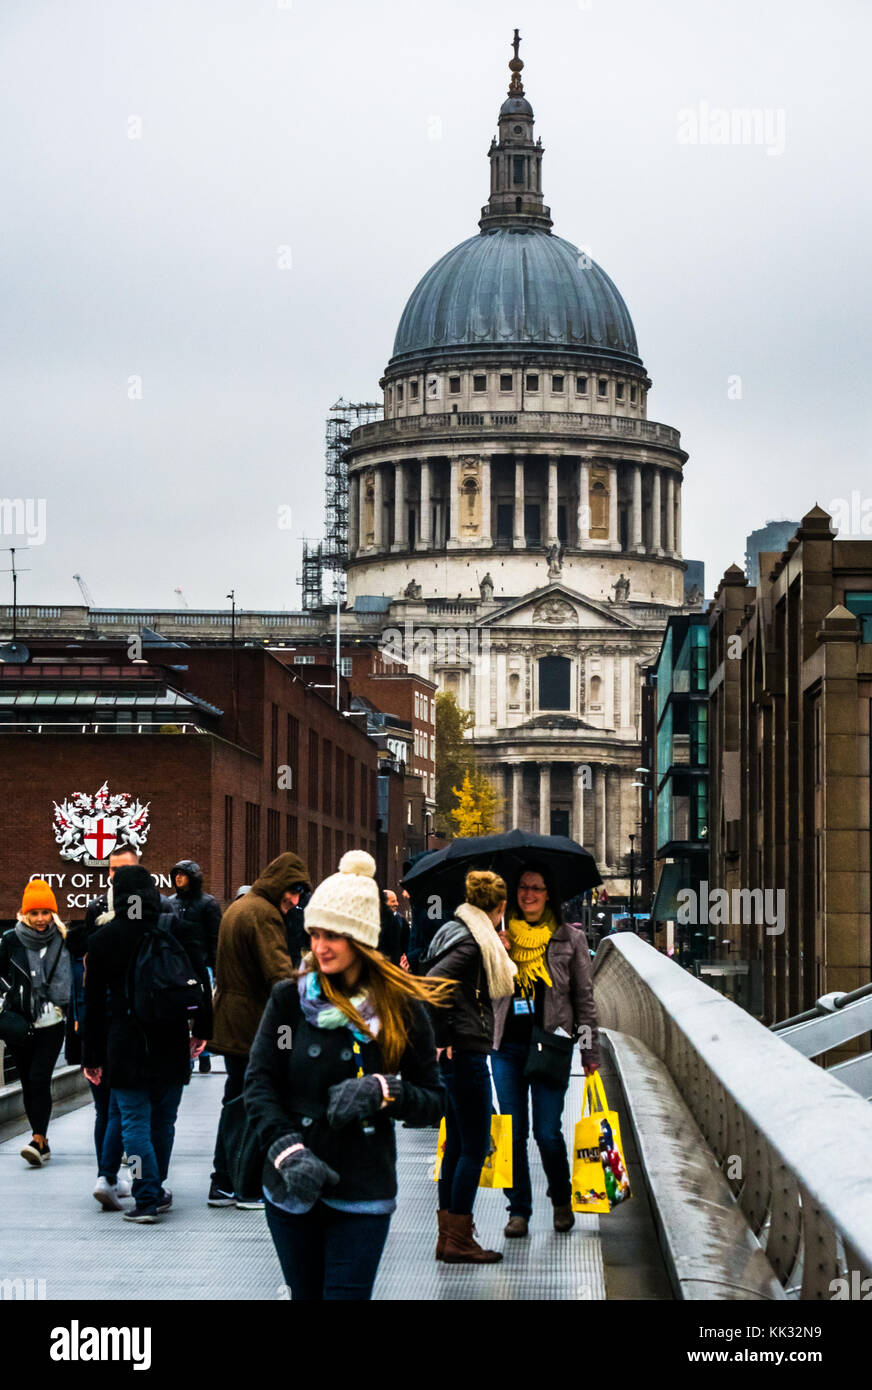 People walking on Millennium Bridge on rainy day to St Pauls Cathedral and City of London school, Thames, England, UK Stock Photo